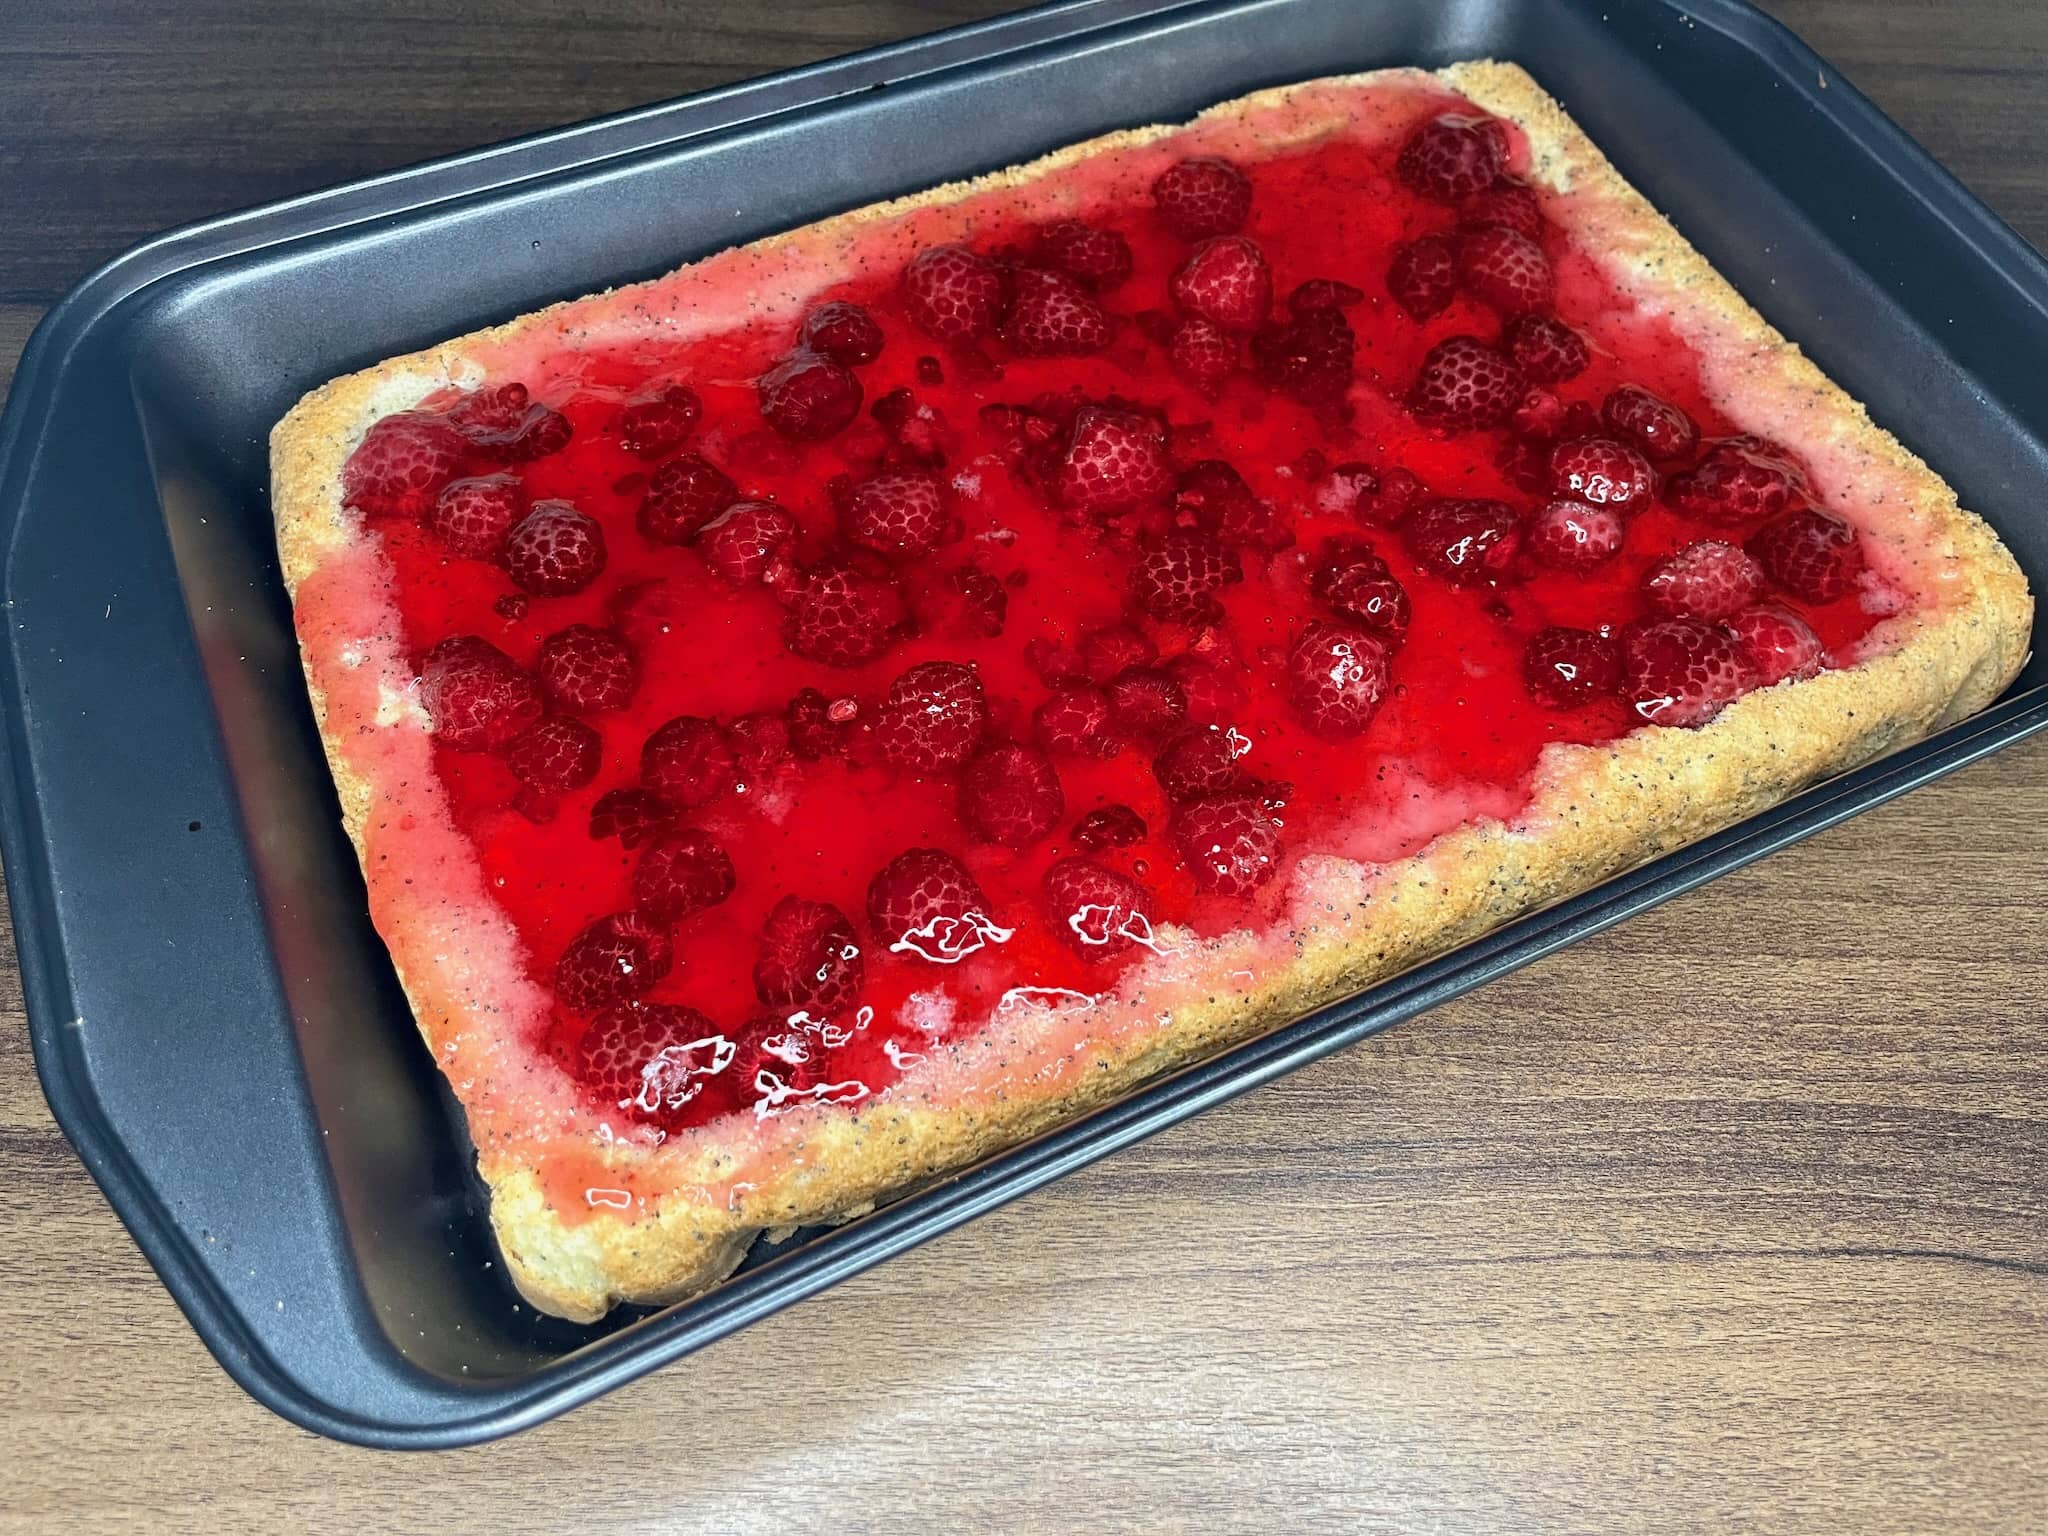 The cake is filled with raspberries in a groove with poured setting jelly